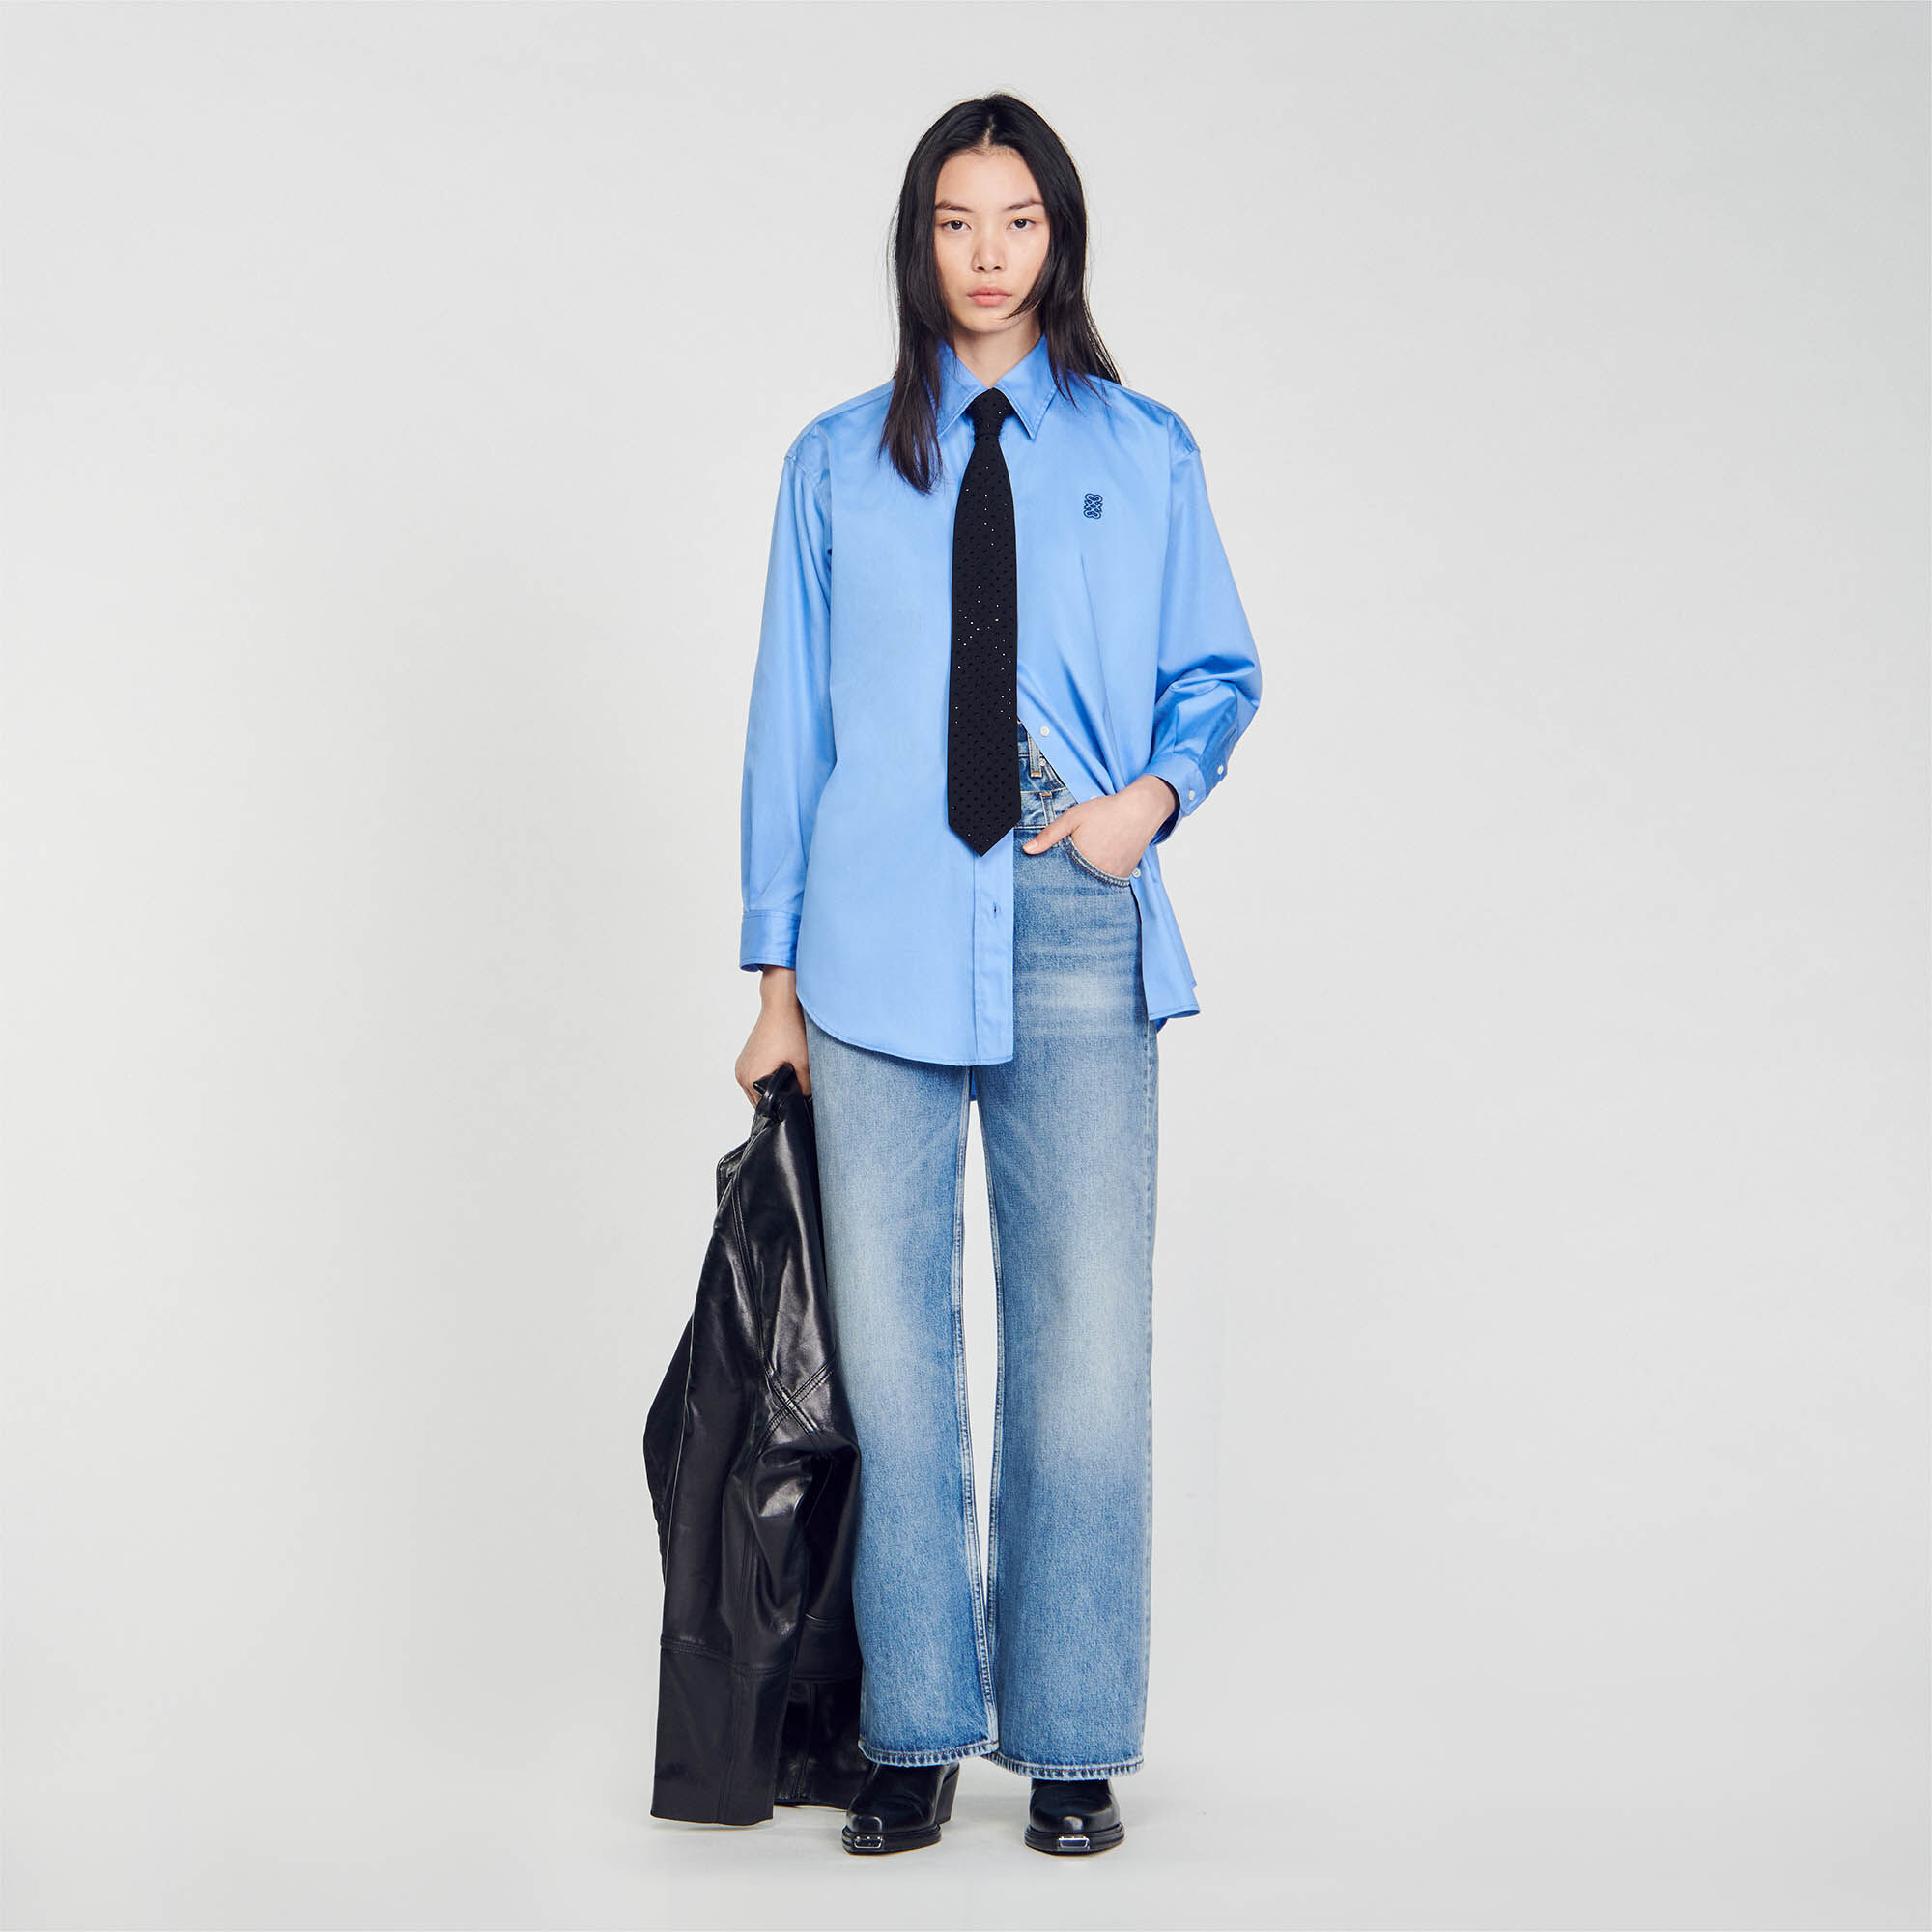 Women's Tops & Shirts - New Collection | Sandro